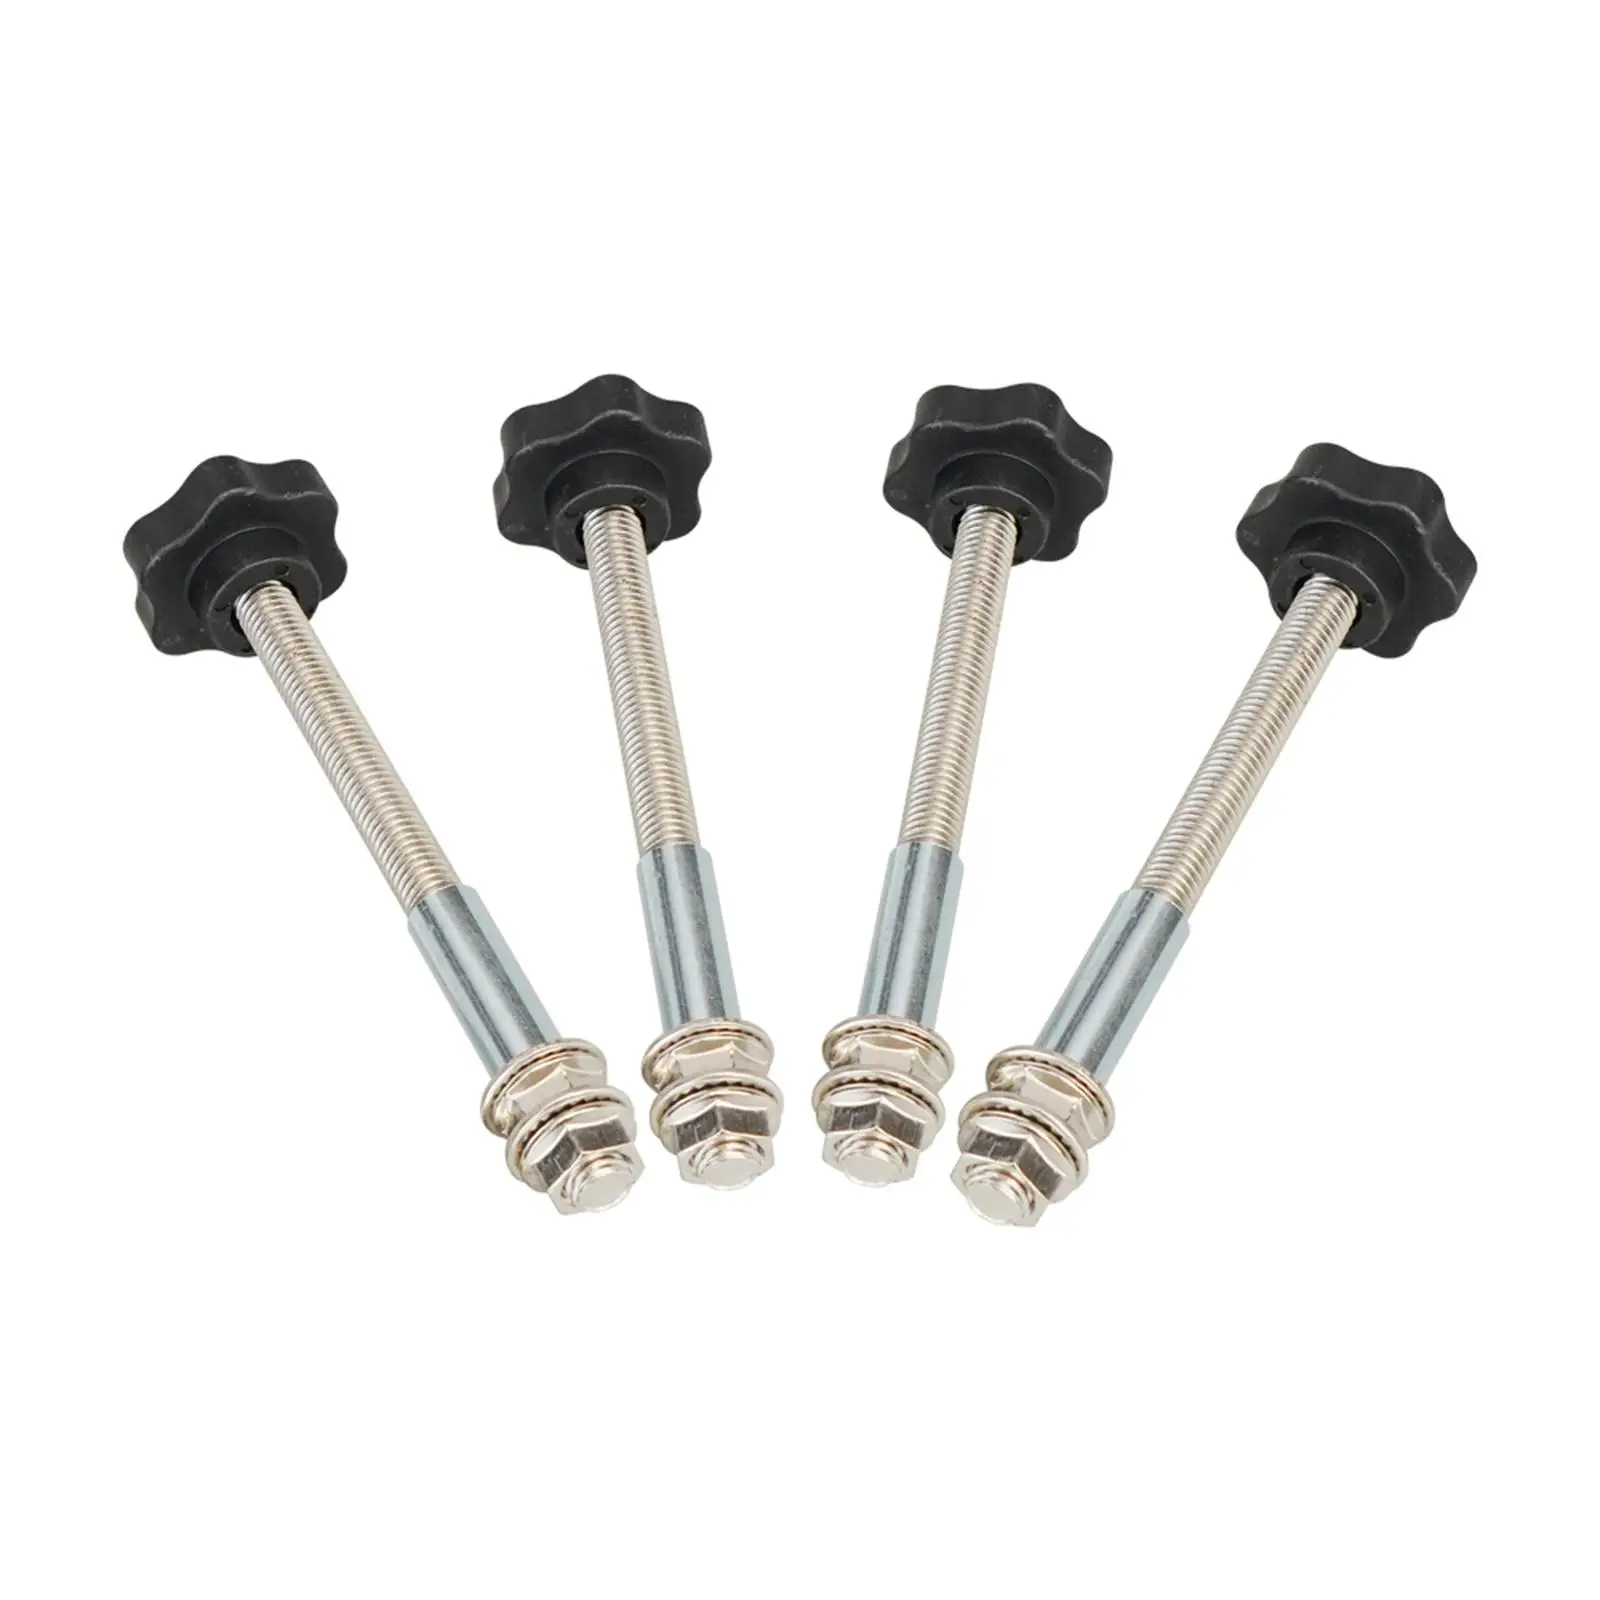 Recovery Track Mounting Pins Kits Repair Parts Hardware Replaces Professional